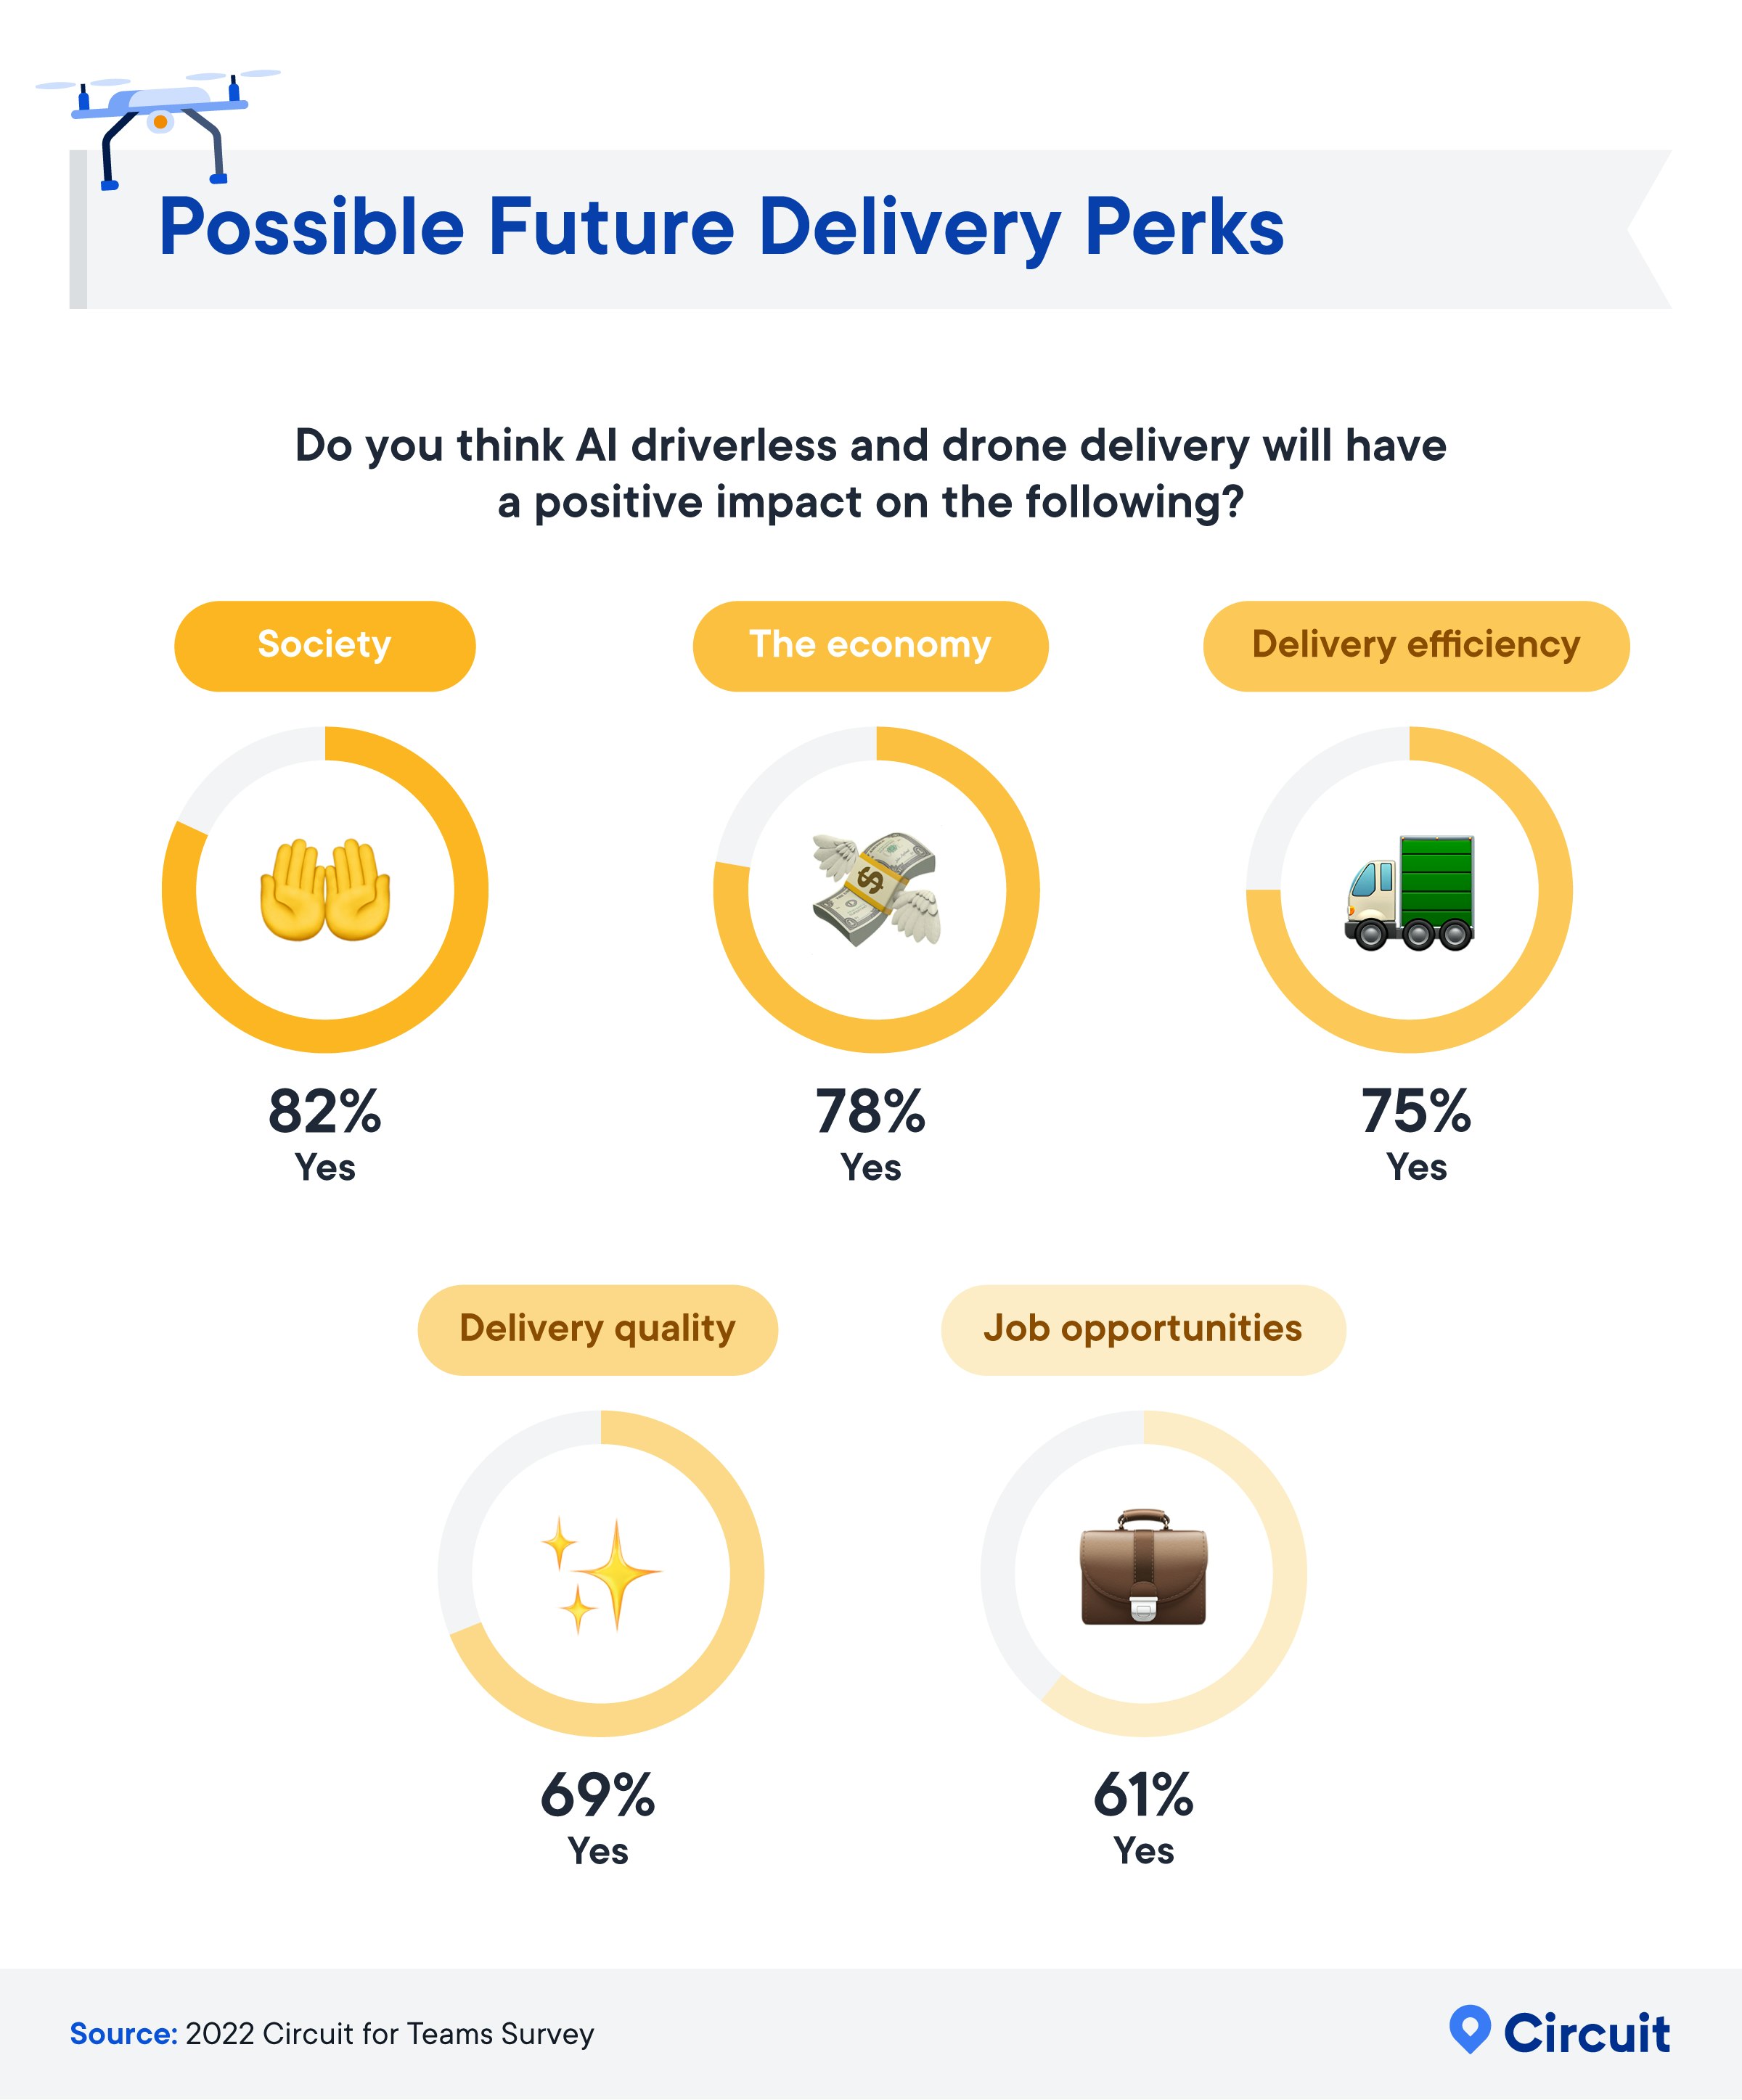 Perceived positive impact of AI driverless and drone deliveries. 